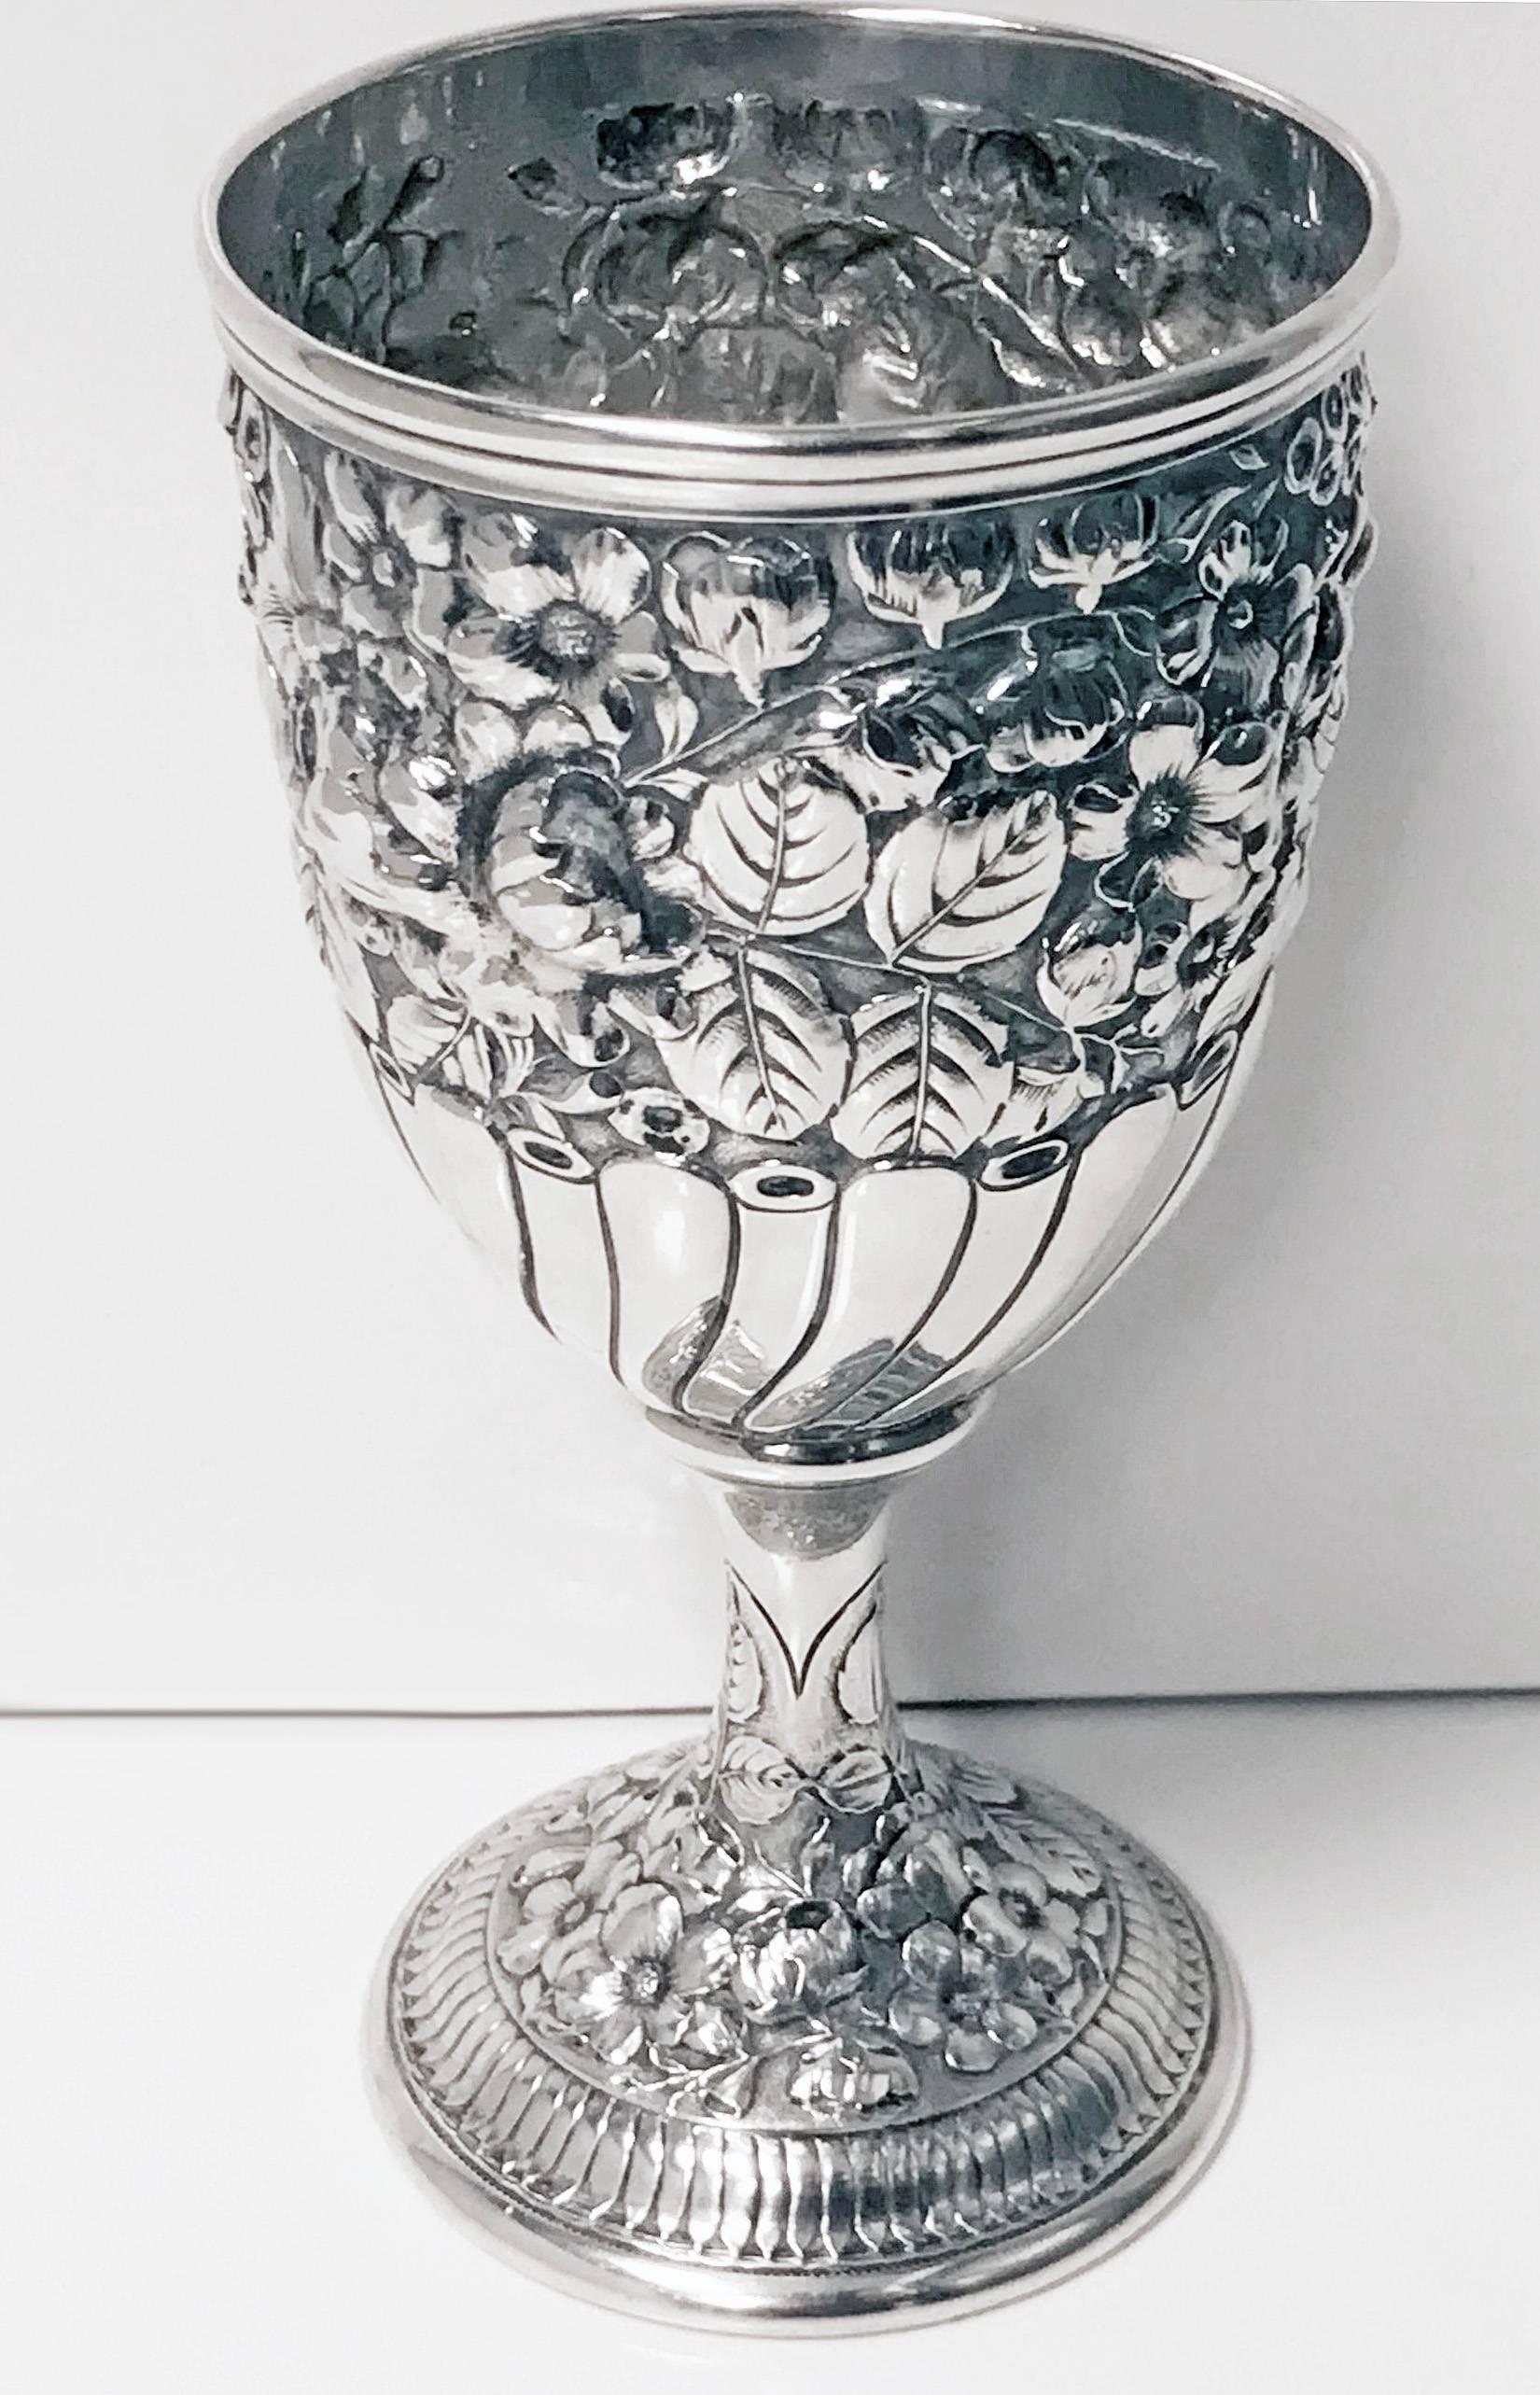 Antique Gorham sterling goblet, circa 1890. The goblet on pedestal base, all richly decorated with embossed repousee chased and engraved foliage decoration. The lower part of vase shape with lobate panel surround, four of which are beautifully